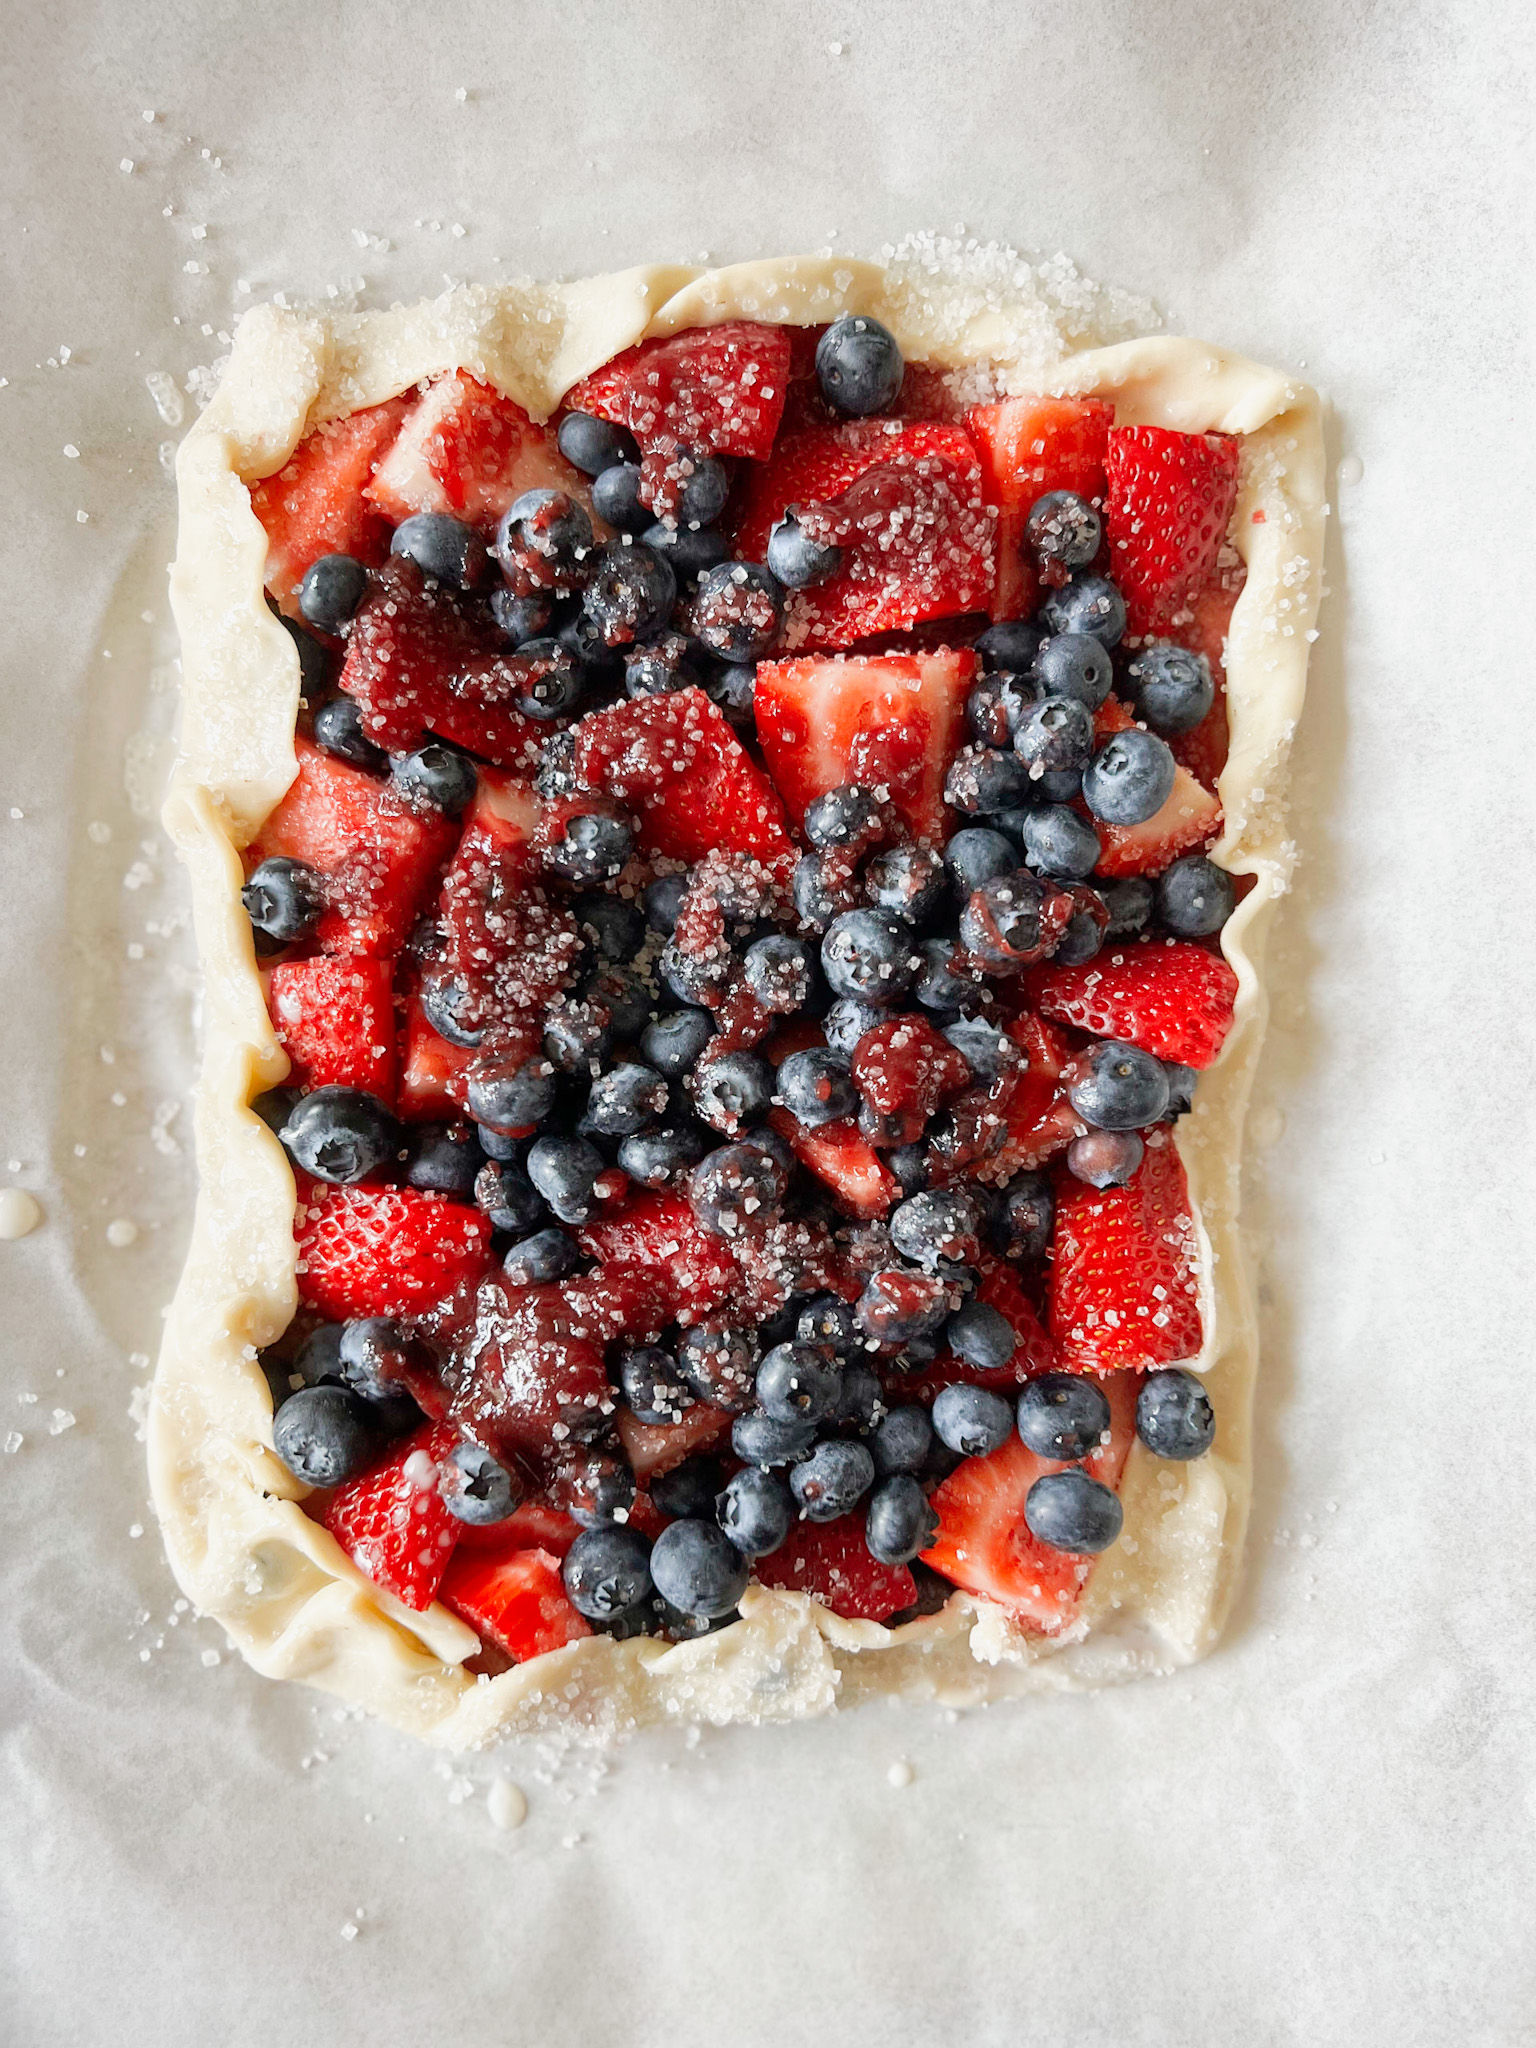 unbaked vegan fruit tart with blueberries and strawberries